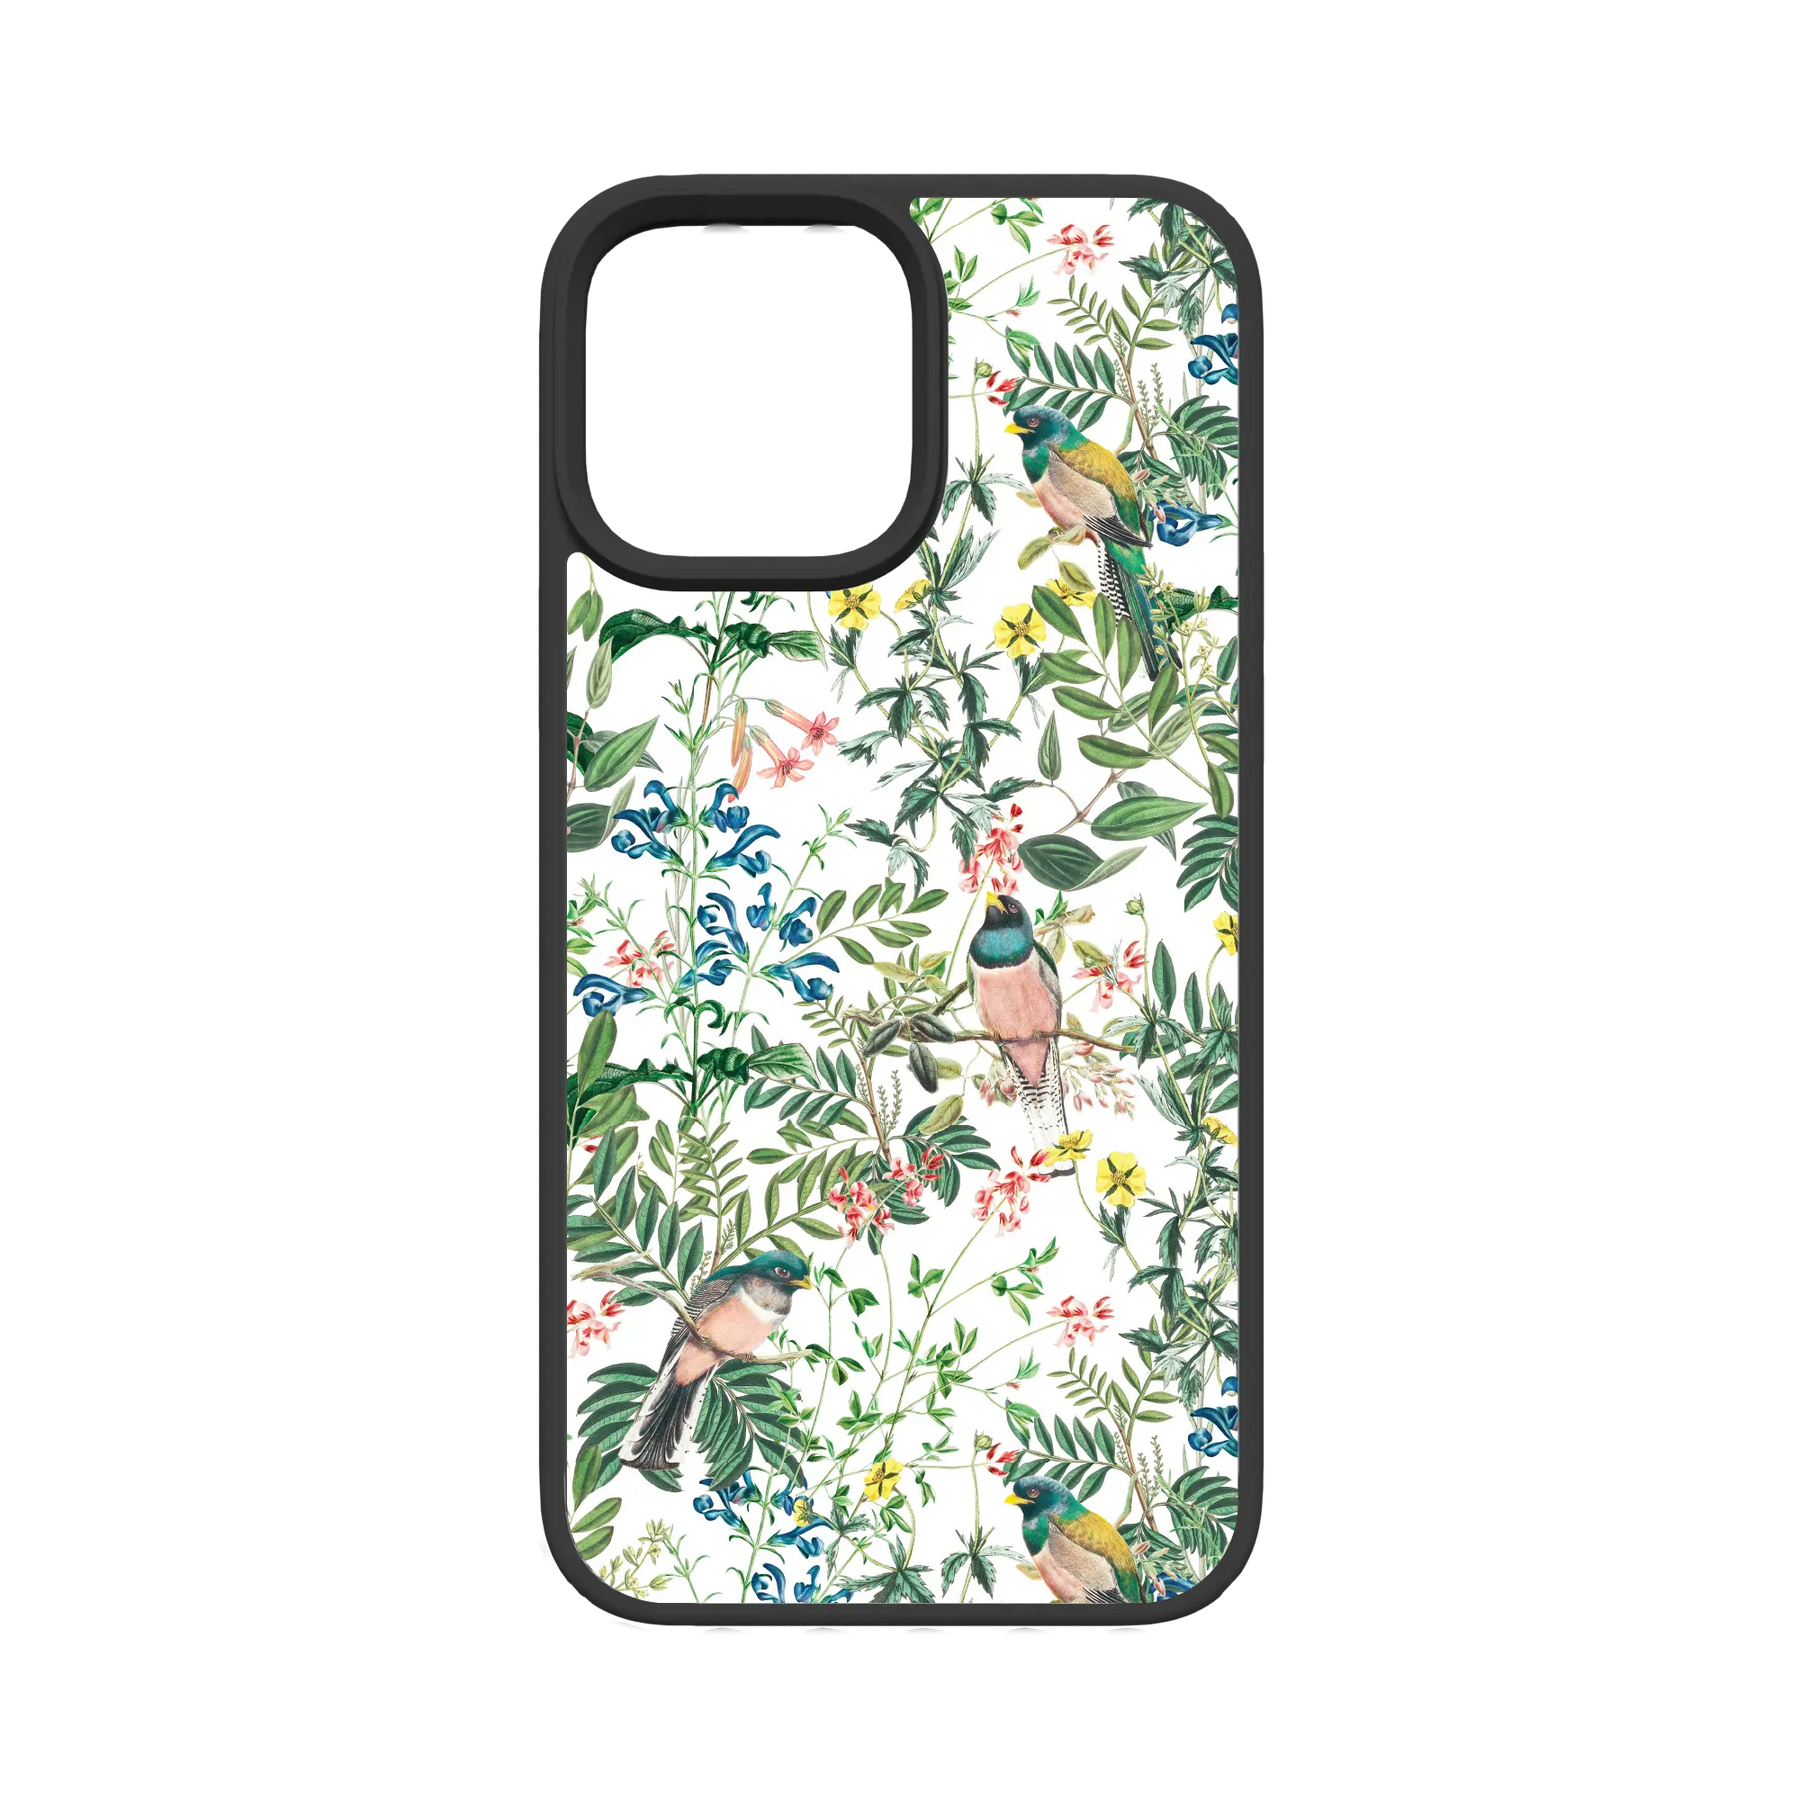 Apple-iPhone-13-Pro-Max-Crystal-Clear Oasis Blossom | Protective MagSafe Floral Bird Case | Birds and Bees Series for Apple iPhone 13 Series cellhelmet cellhelmet